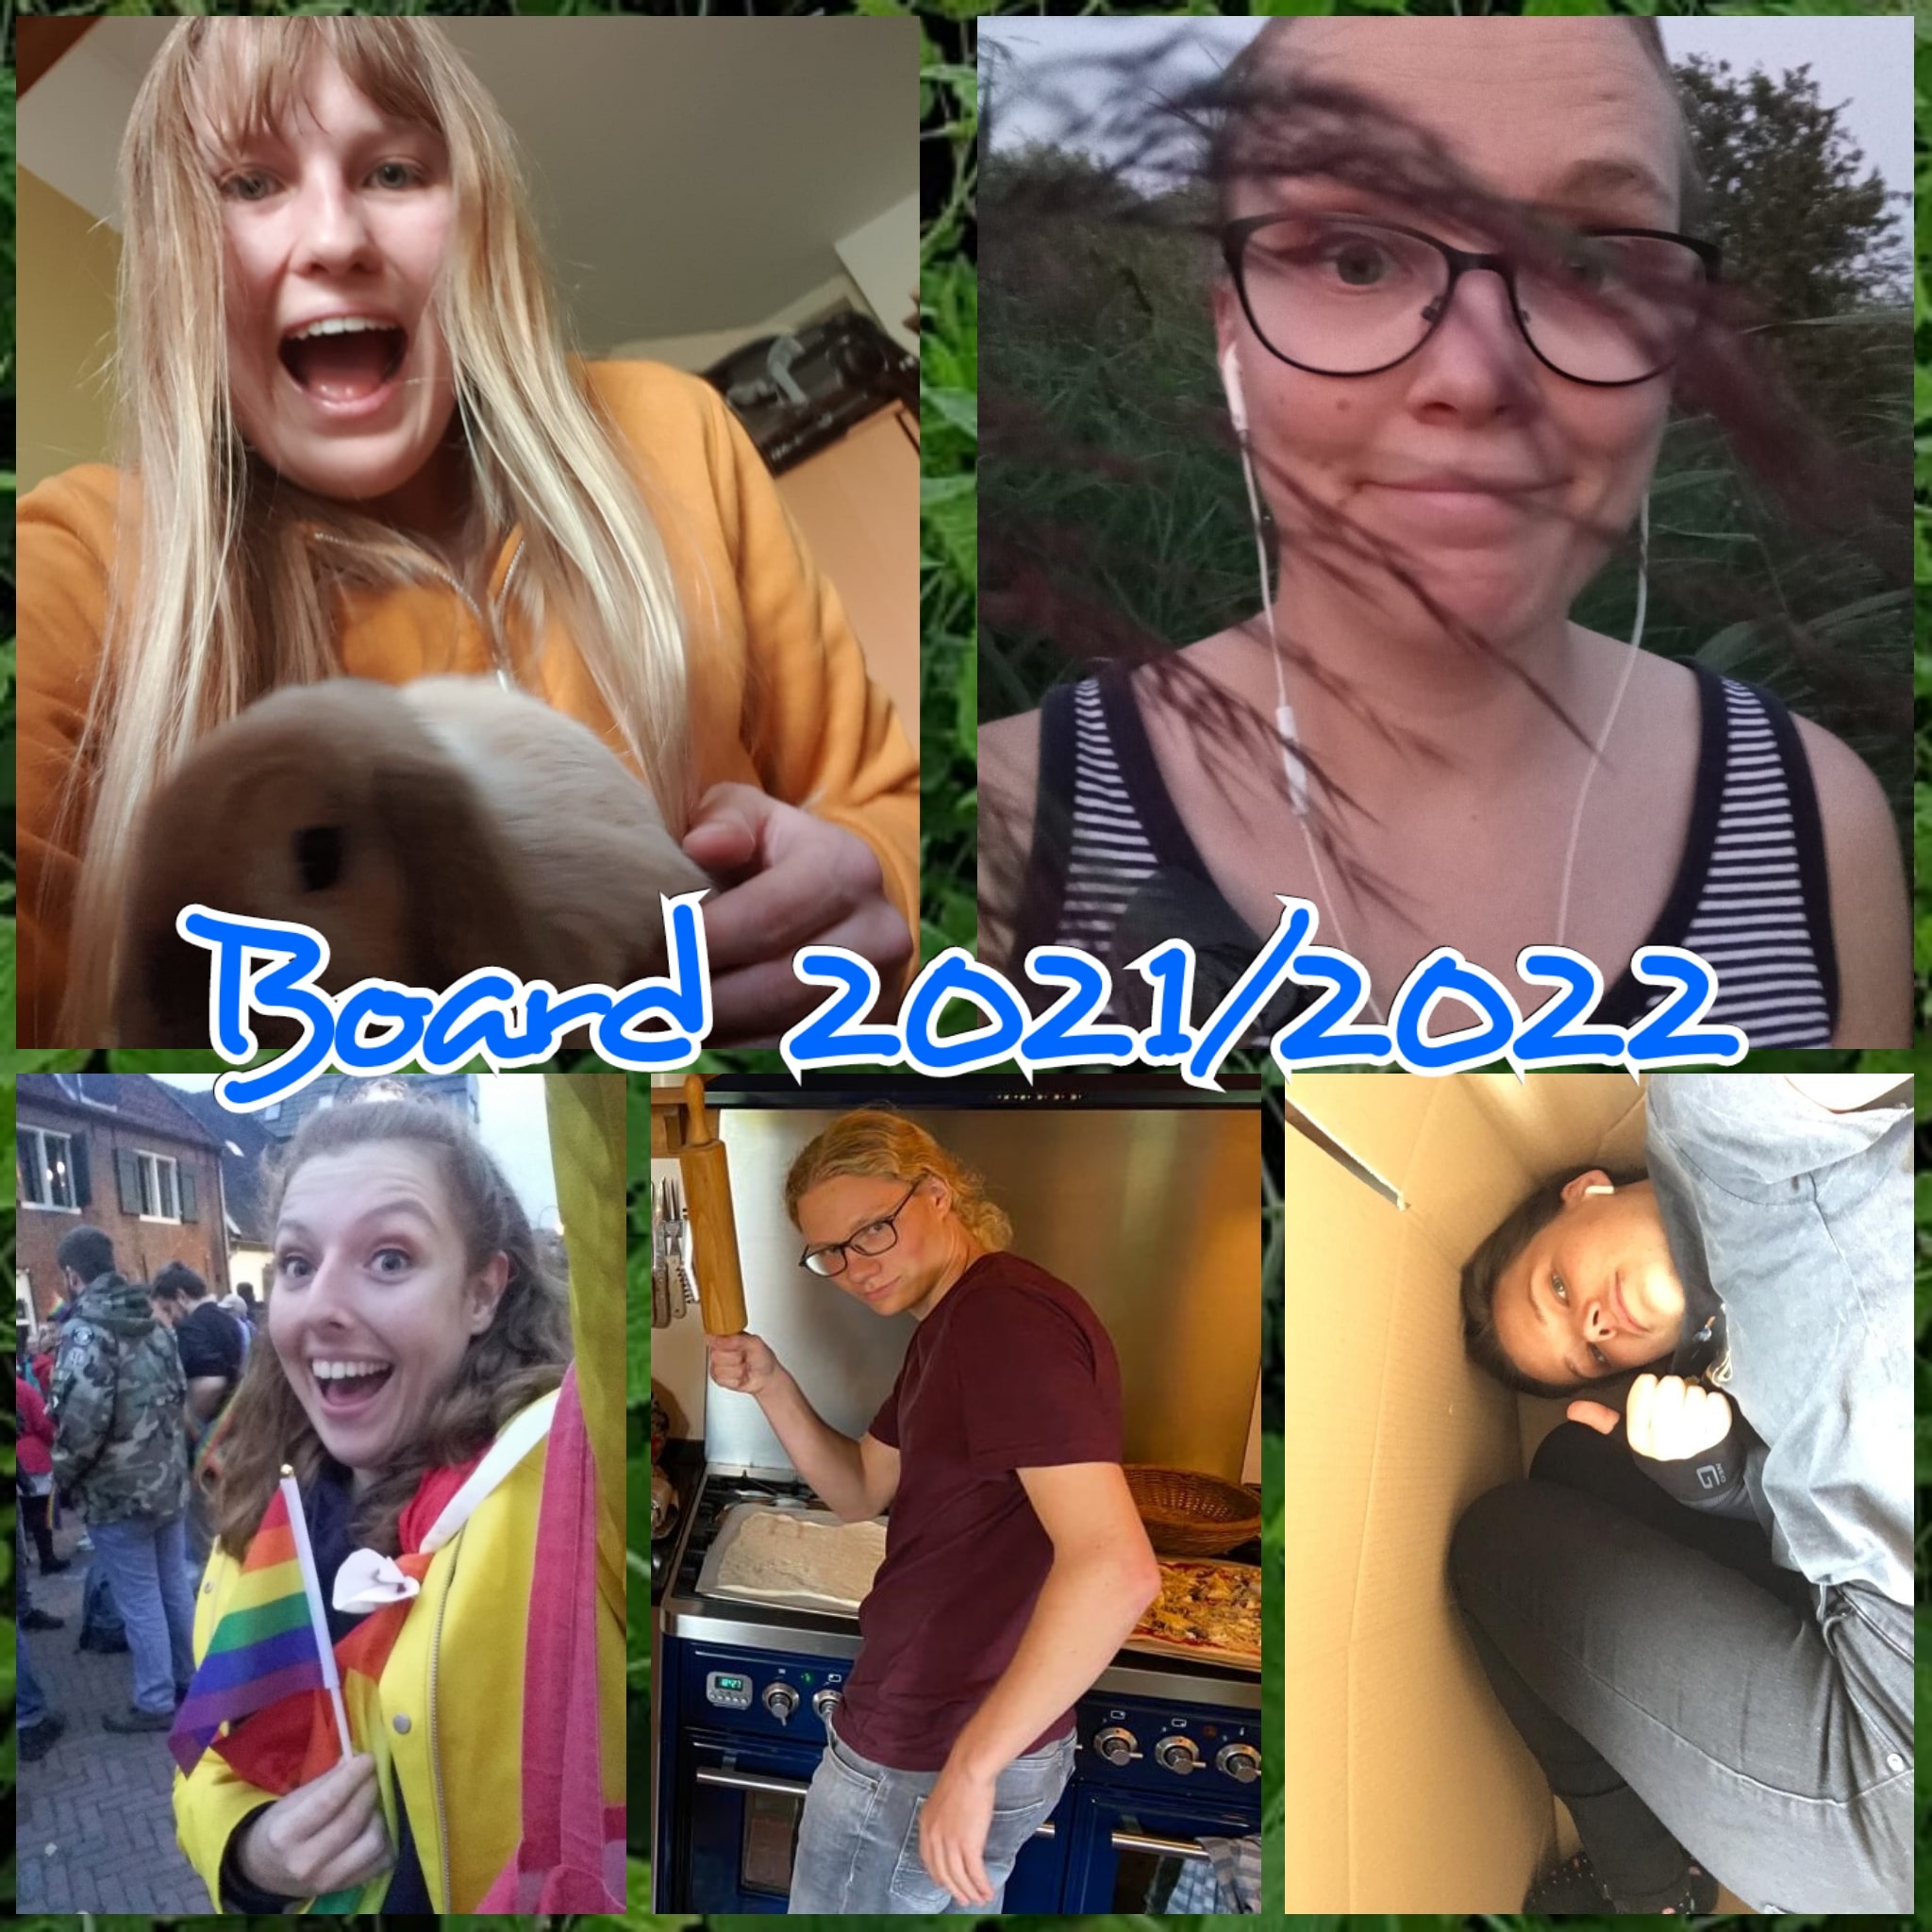 Pictures of 2021/2022 board